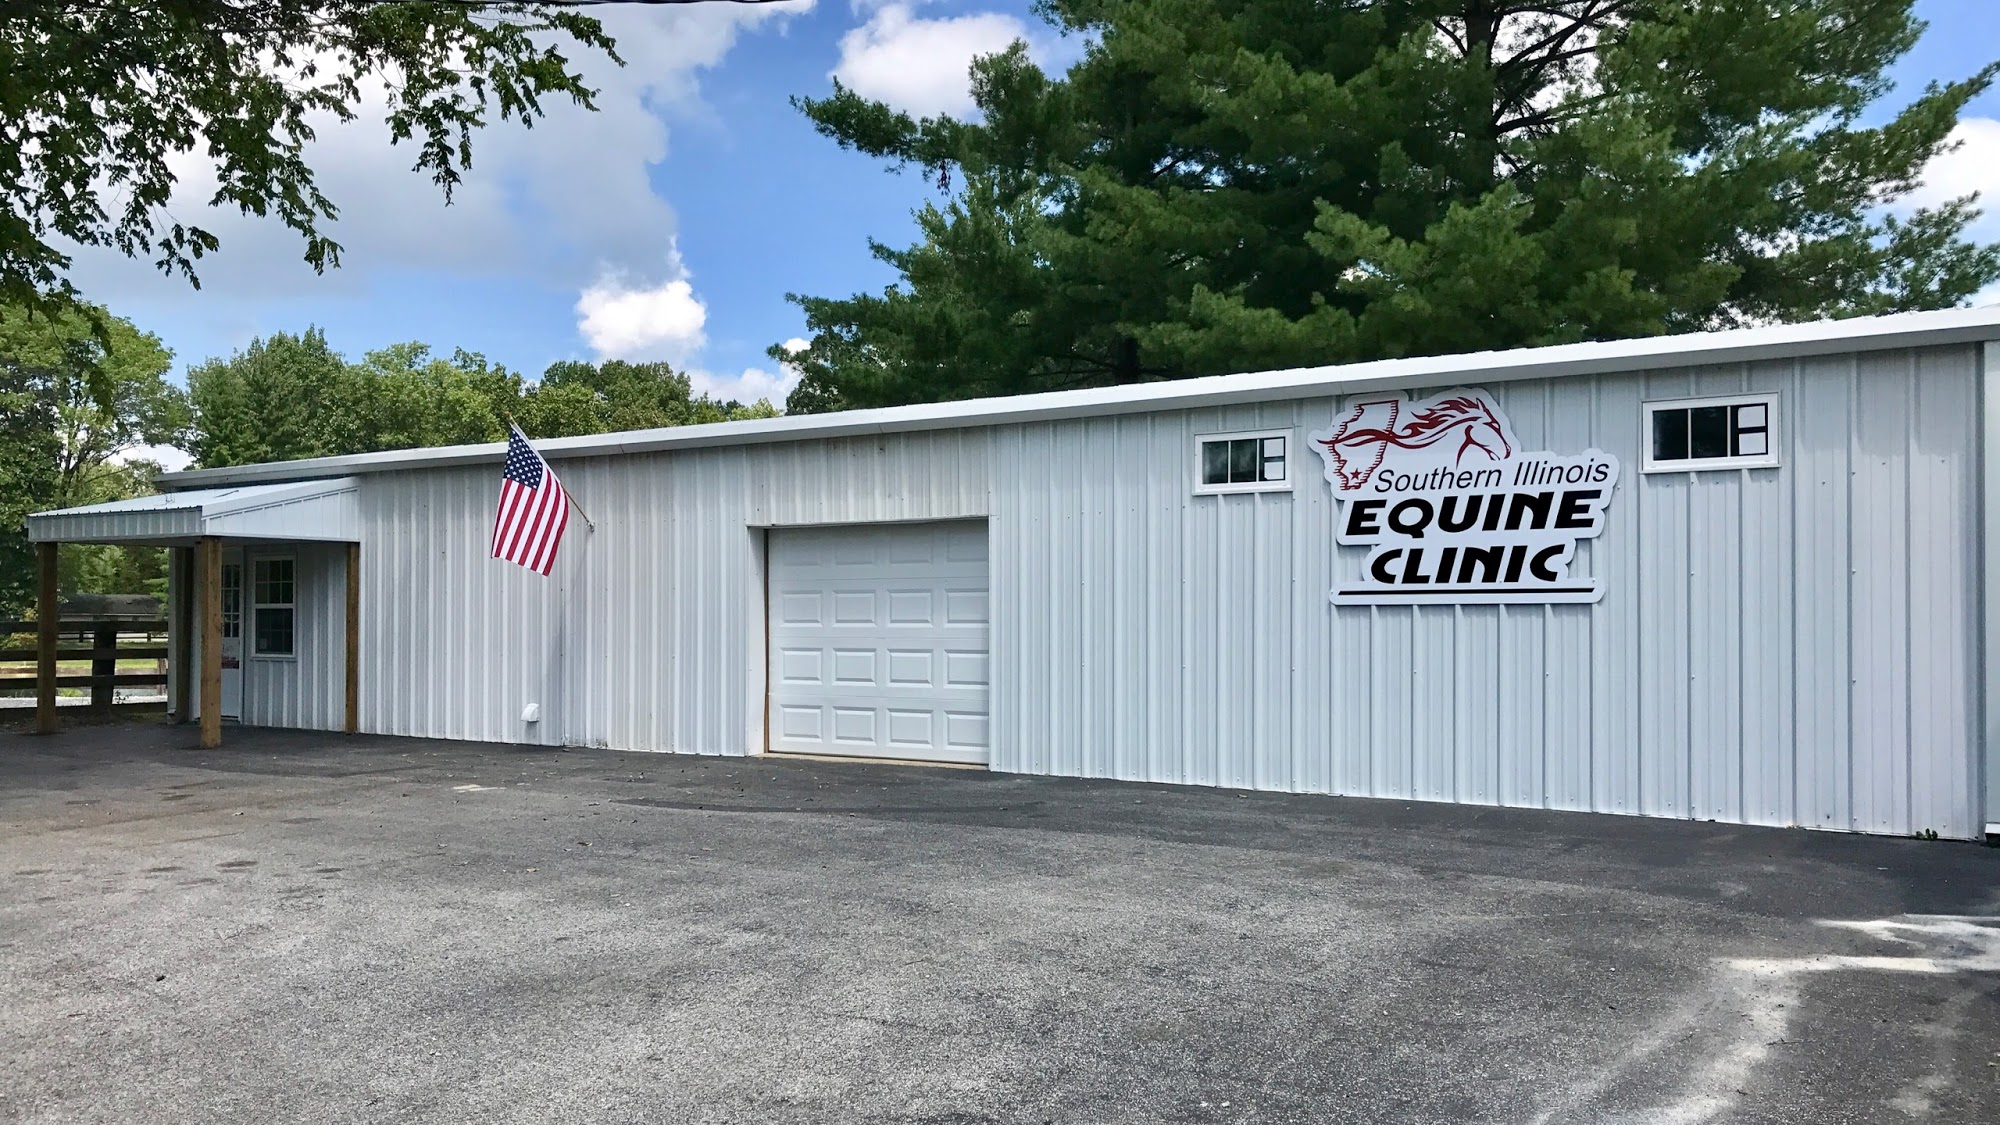 Southern Illinois Equine Clinic